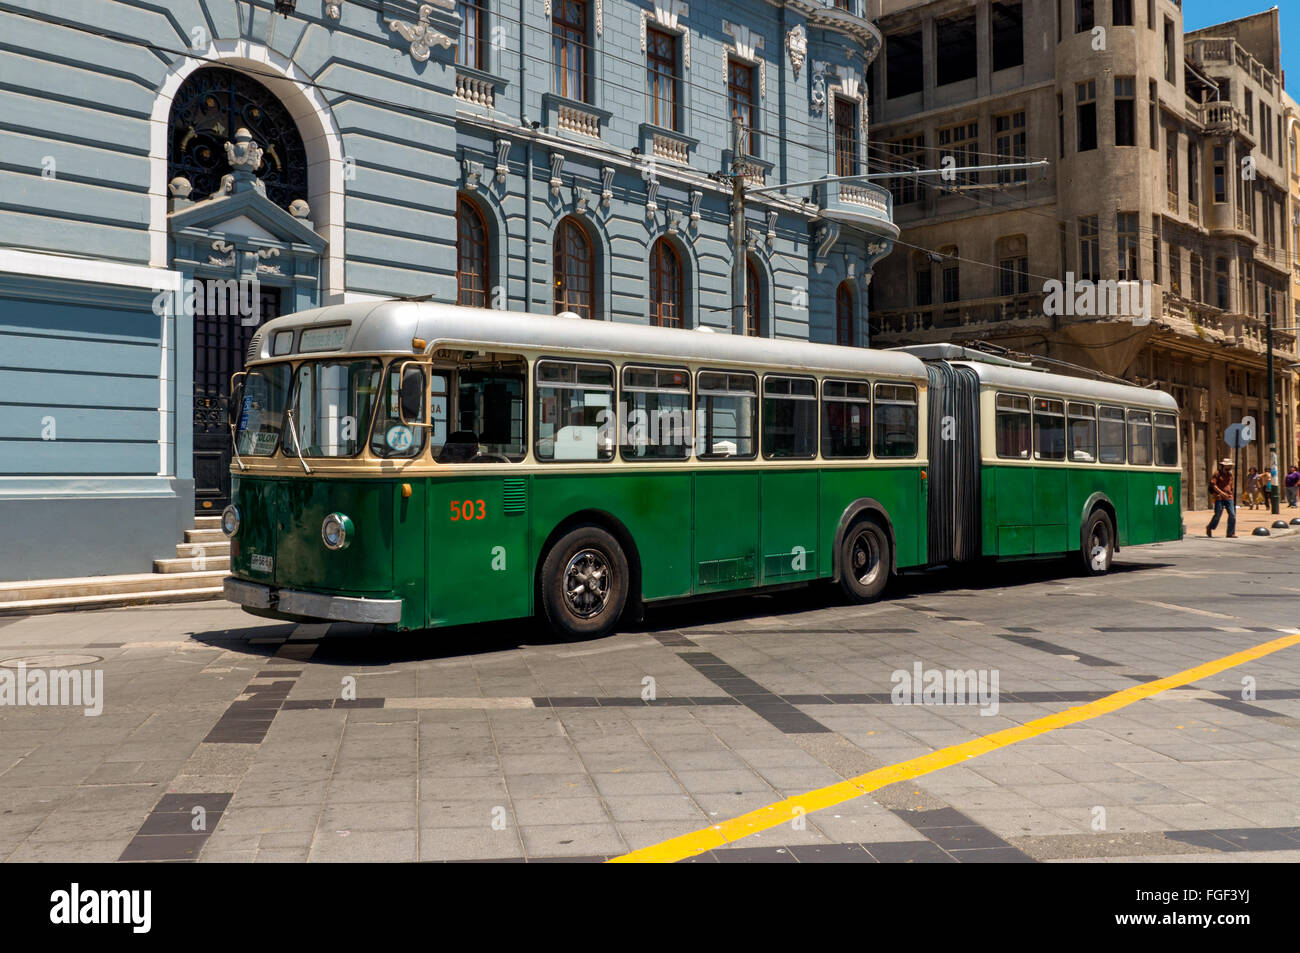 the Historic trolley bus in the UNESCO world heritage city of Valparaiso in Chile. Stock Photo